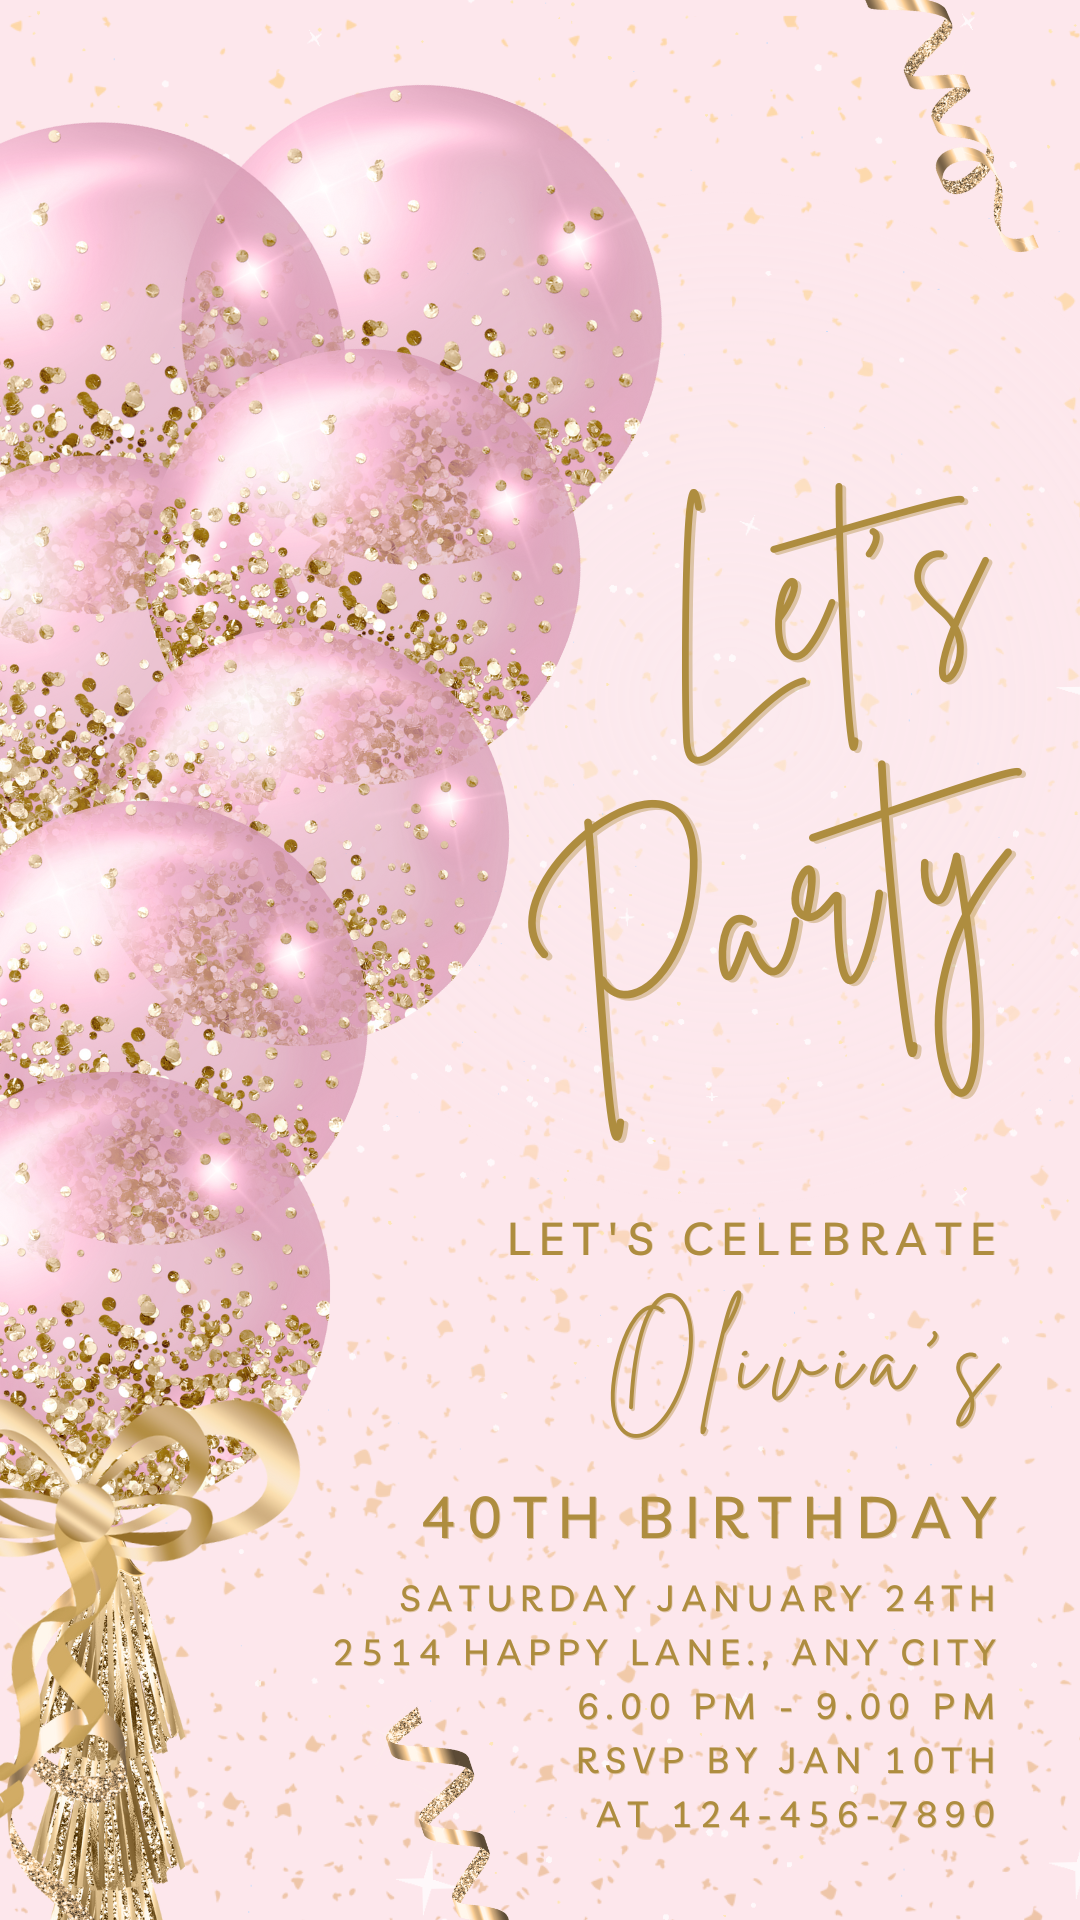 Let's Party Animated Invite for any Event Celebration, Editable Video Template, Birthday invitation for any Age | Sweet Pink & Gold E-vite